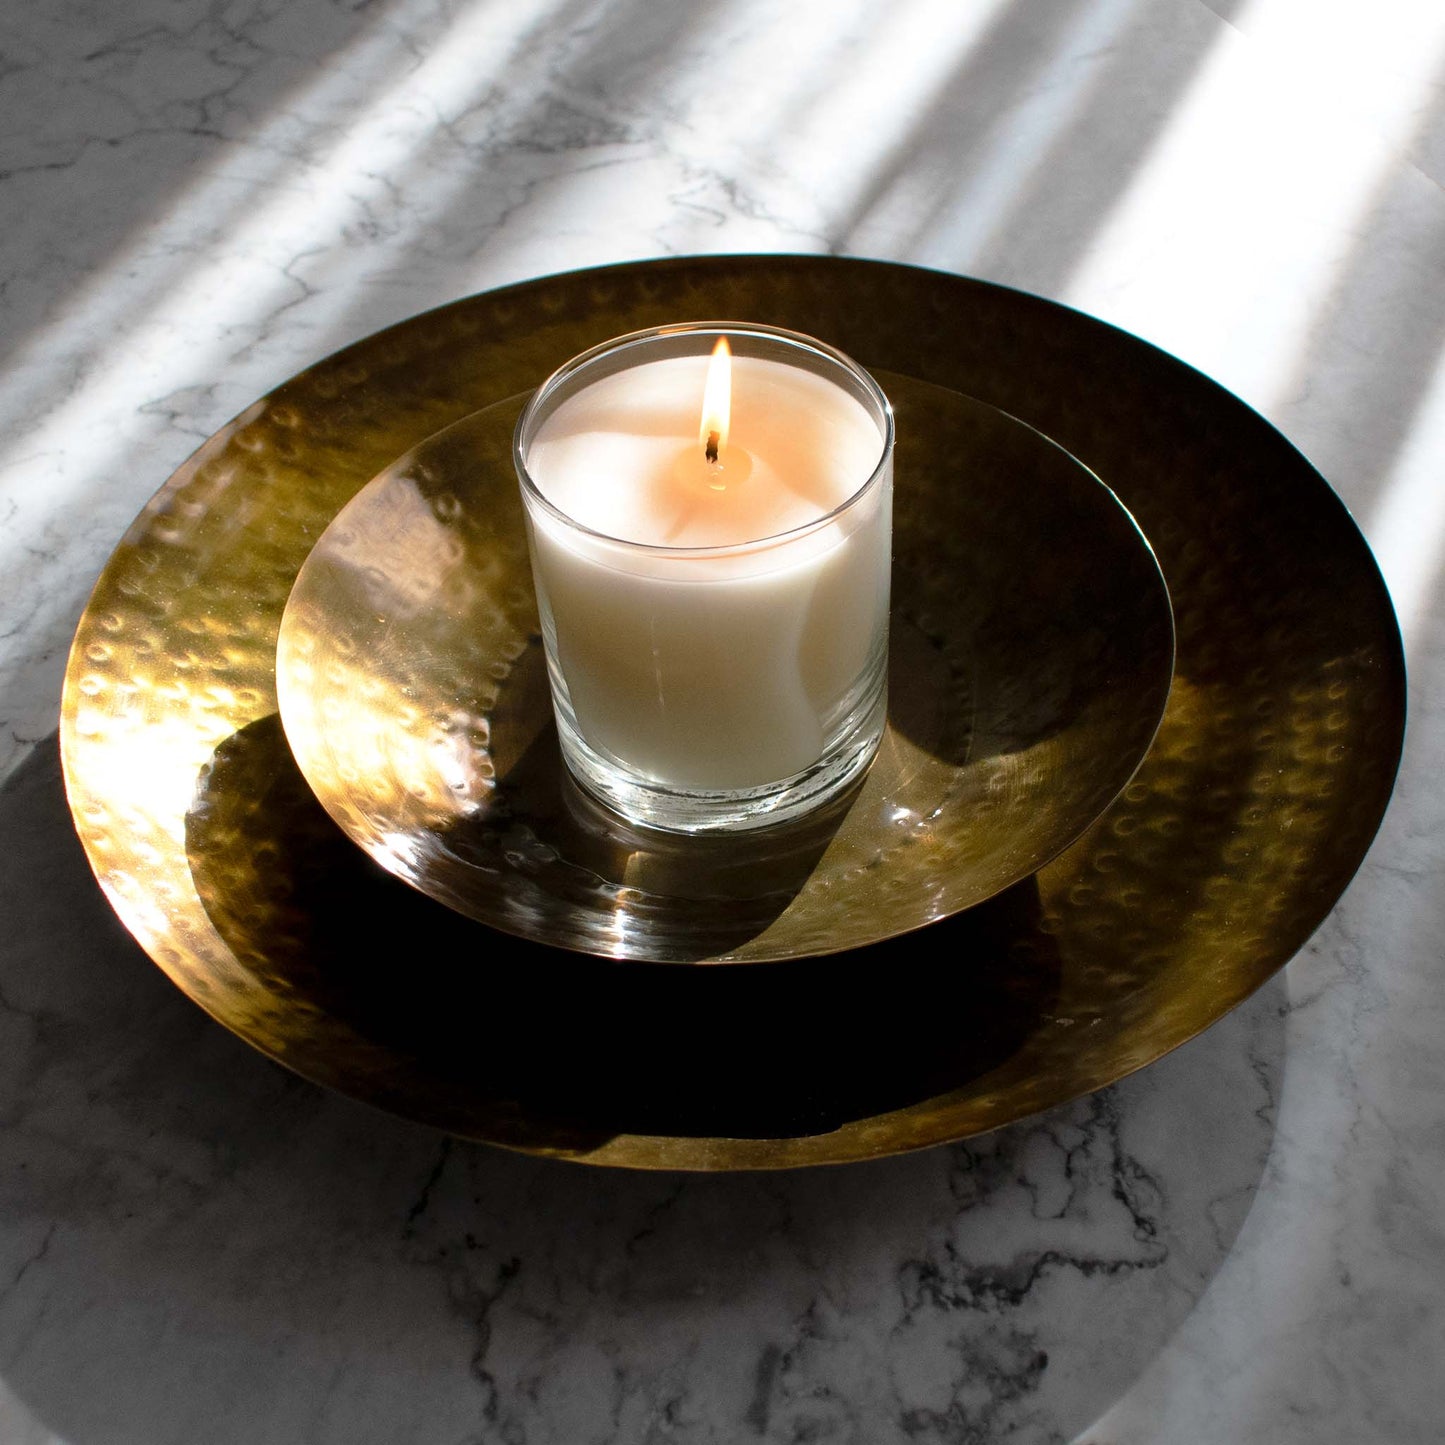 Nested antique finished round brass trays, with burning candle, on marble table.